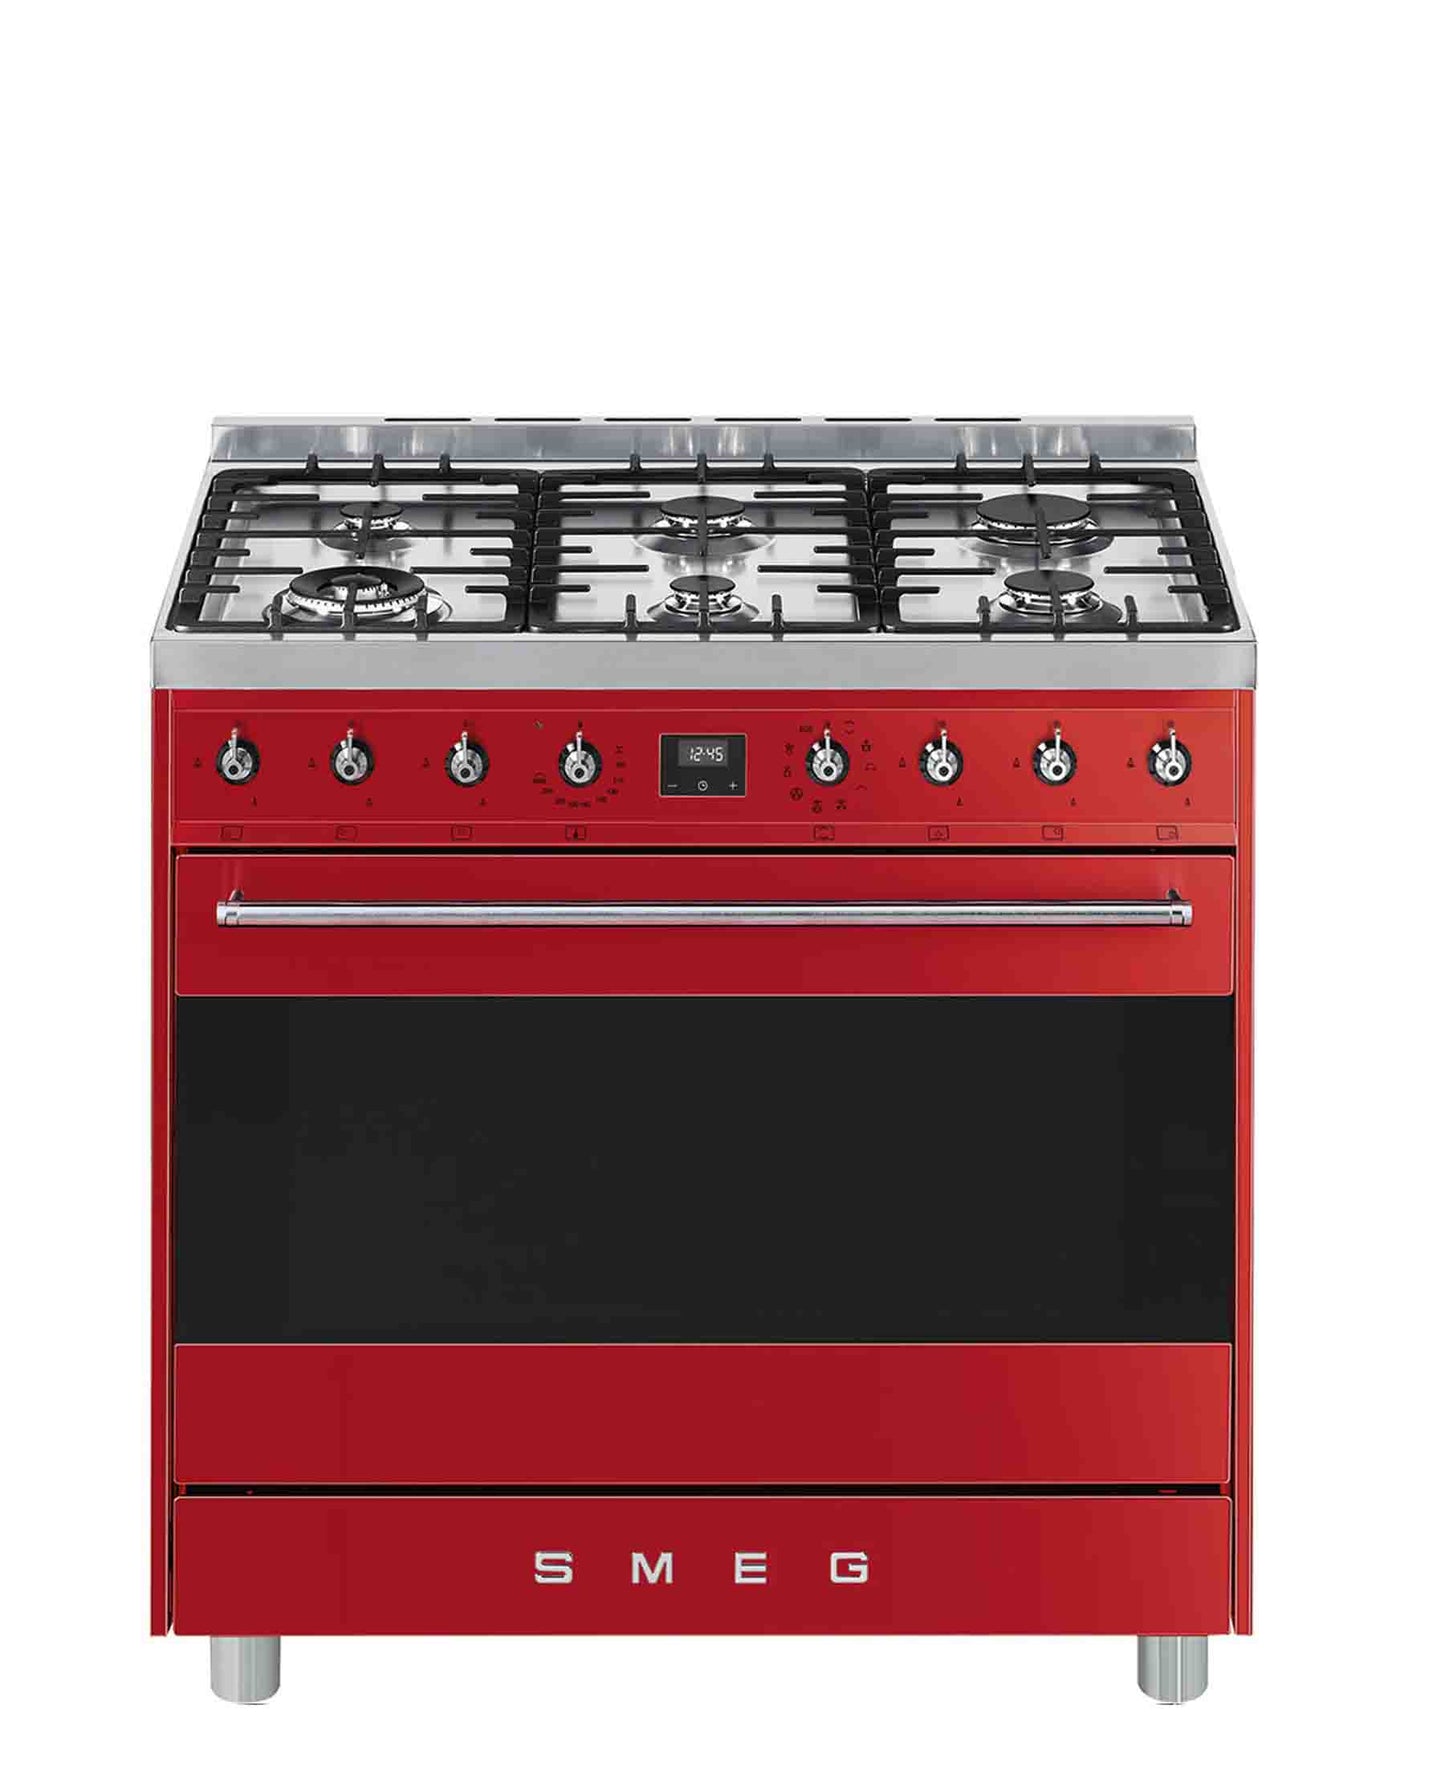 Smeg 90cm Gas/Electric Cooker - Red